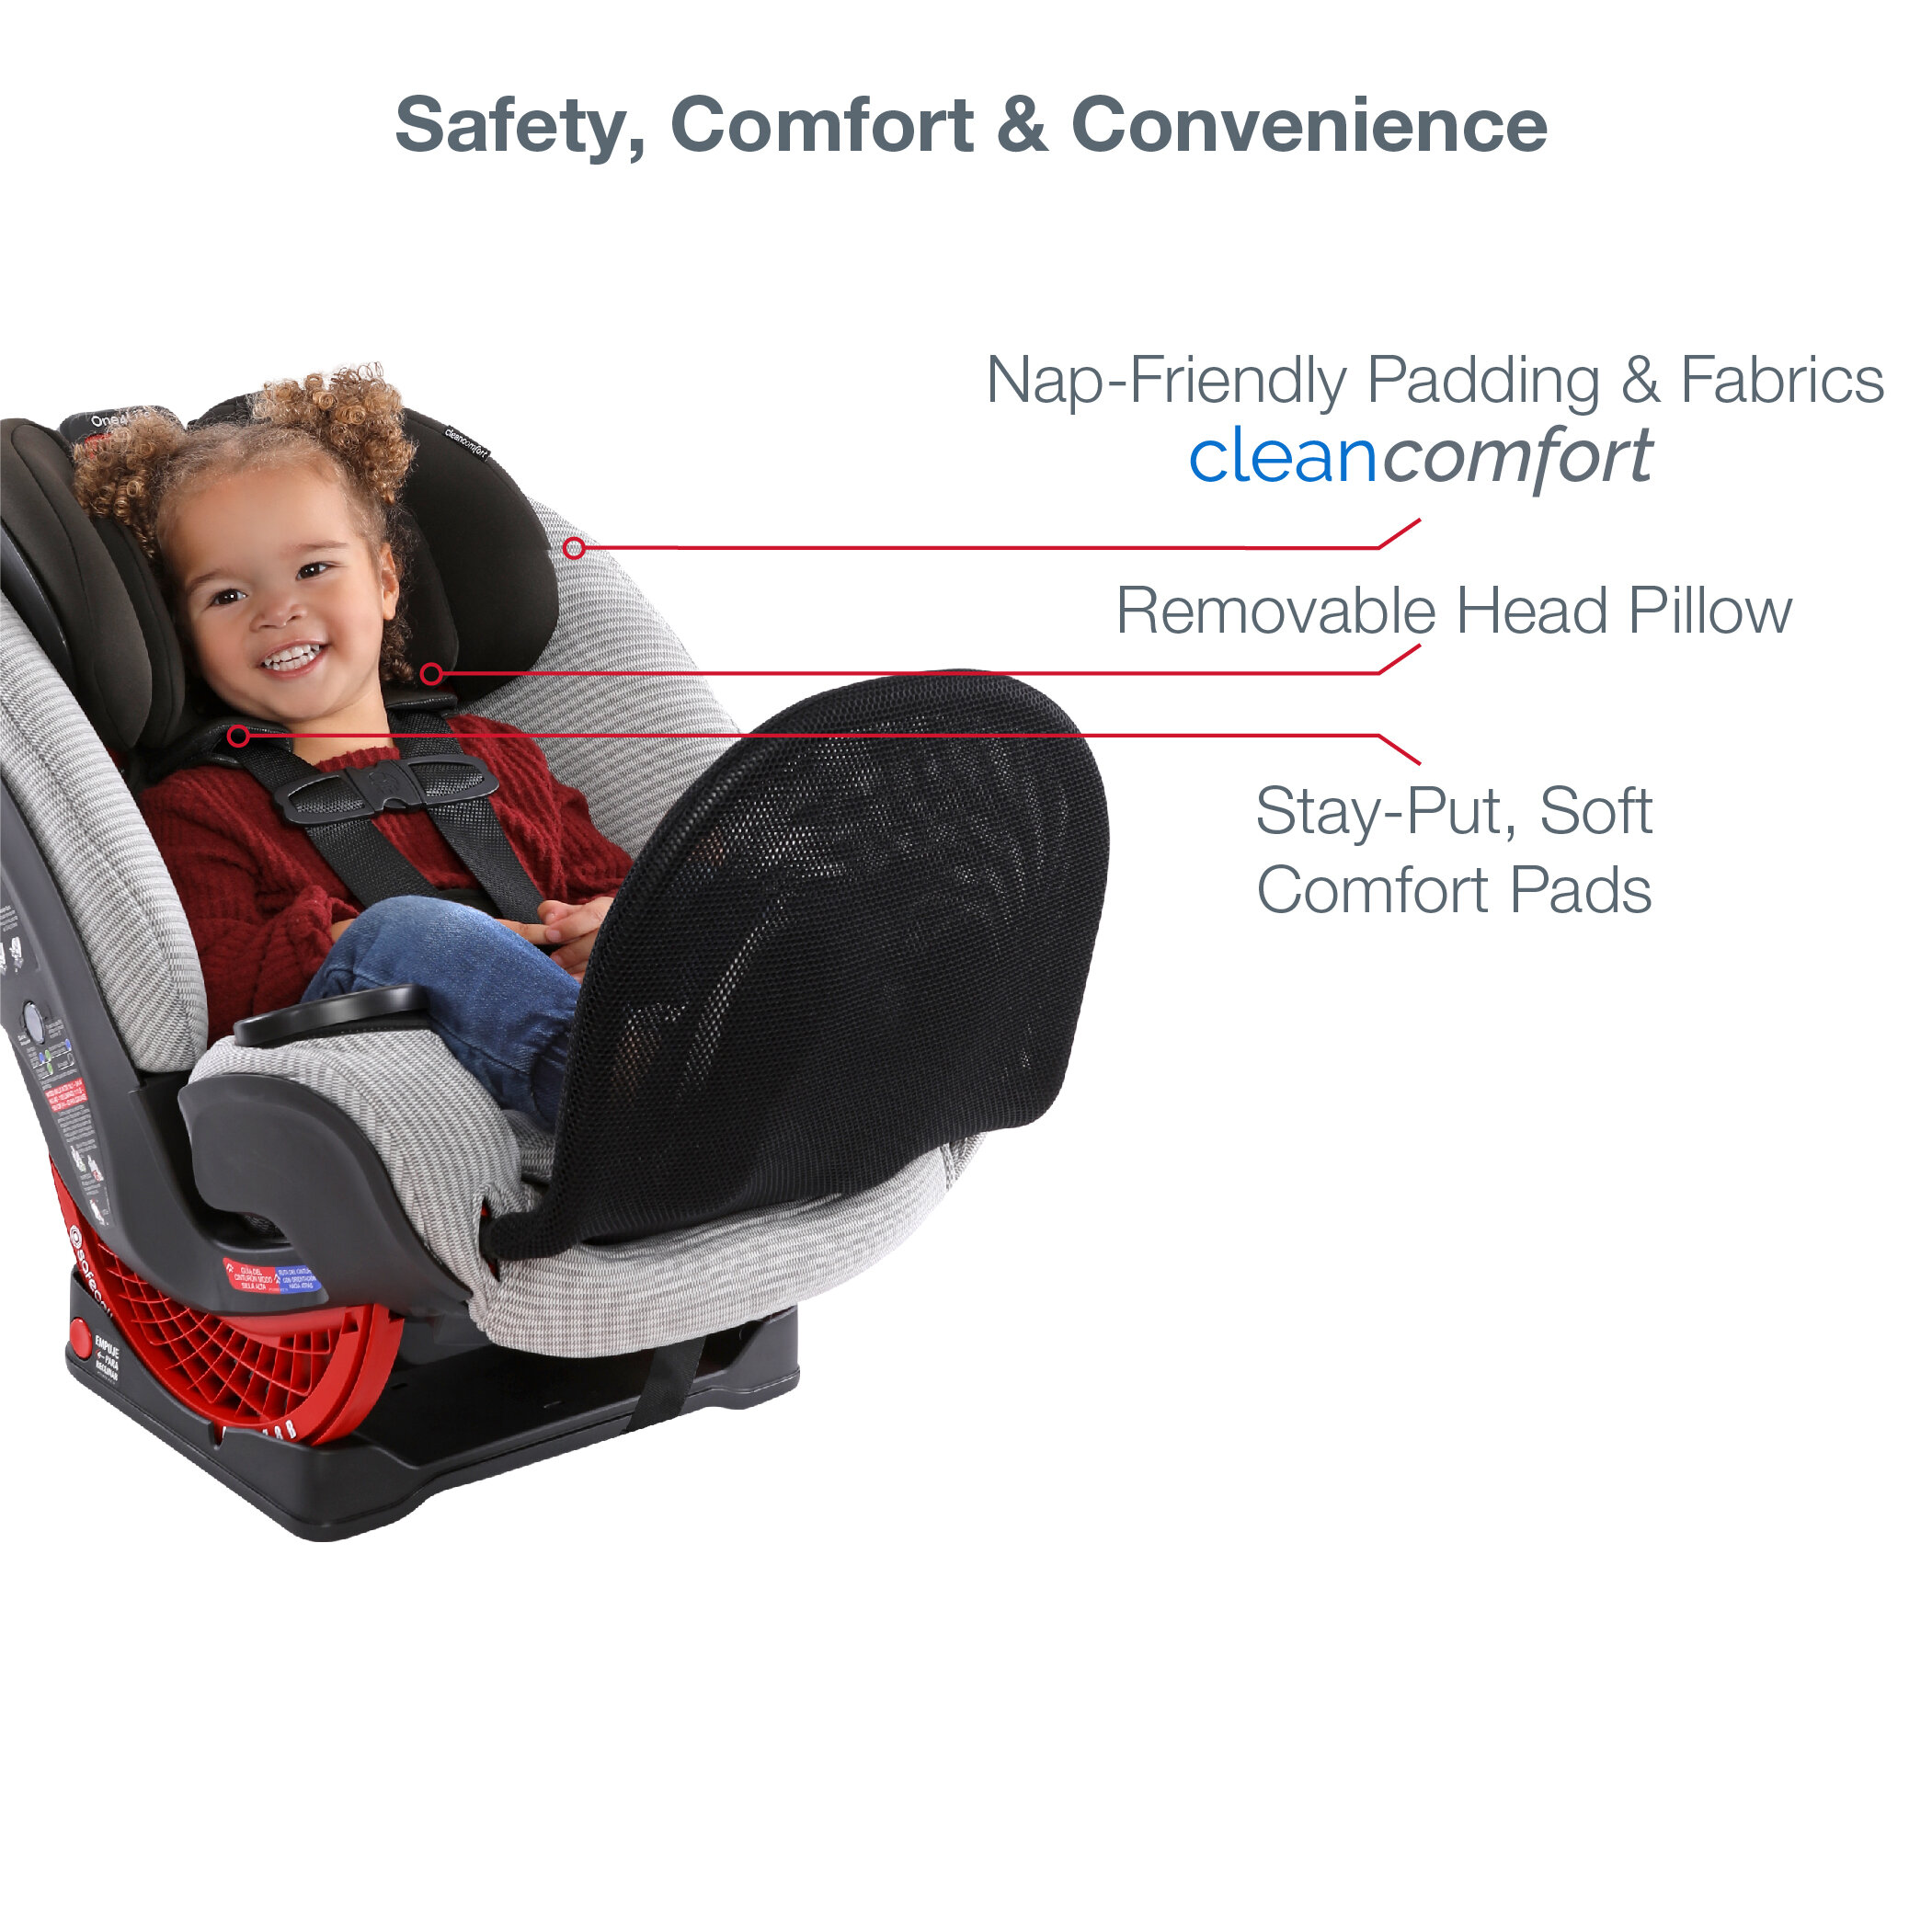 Clean Comfort- Safety Comfort &amp; Convenience (Copy)